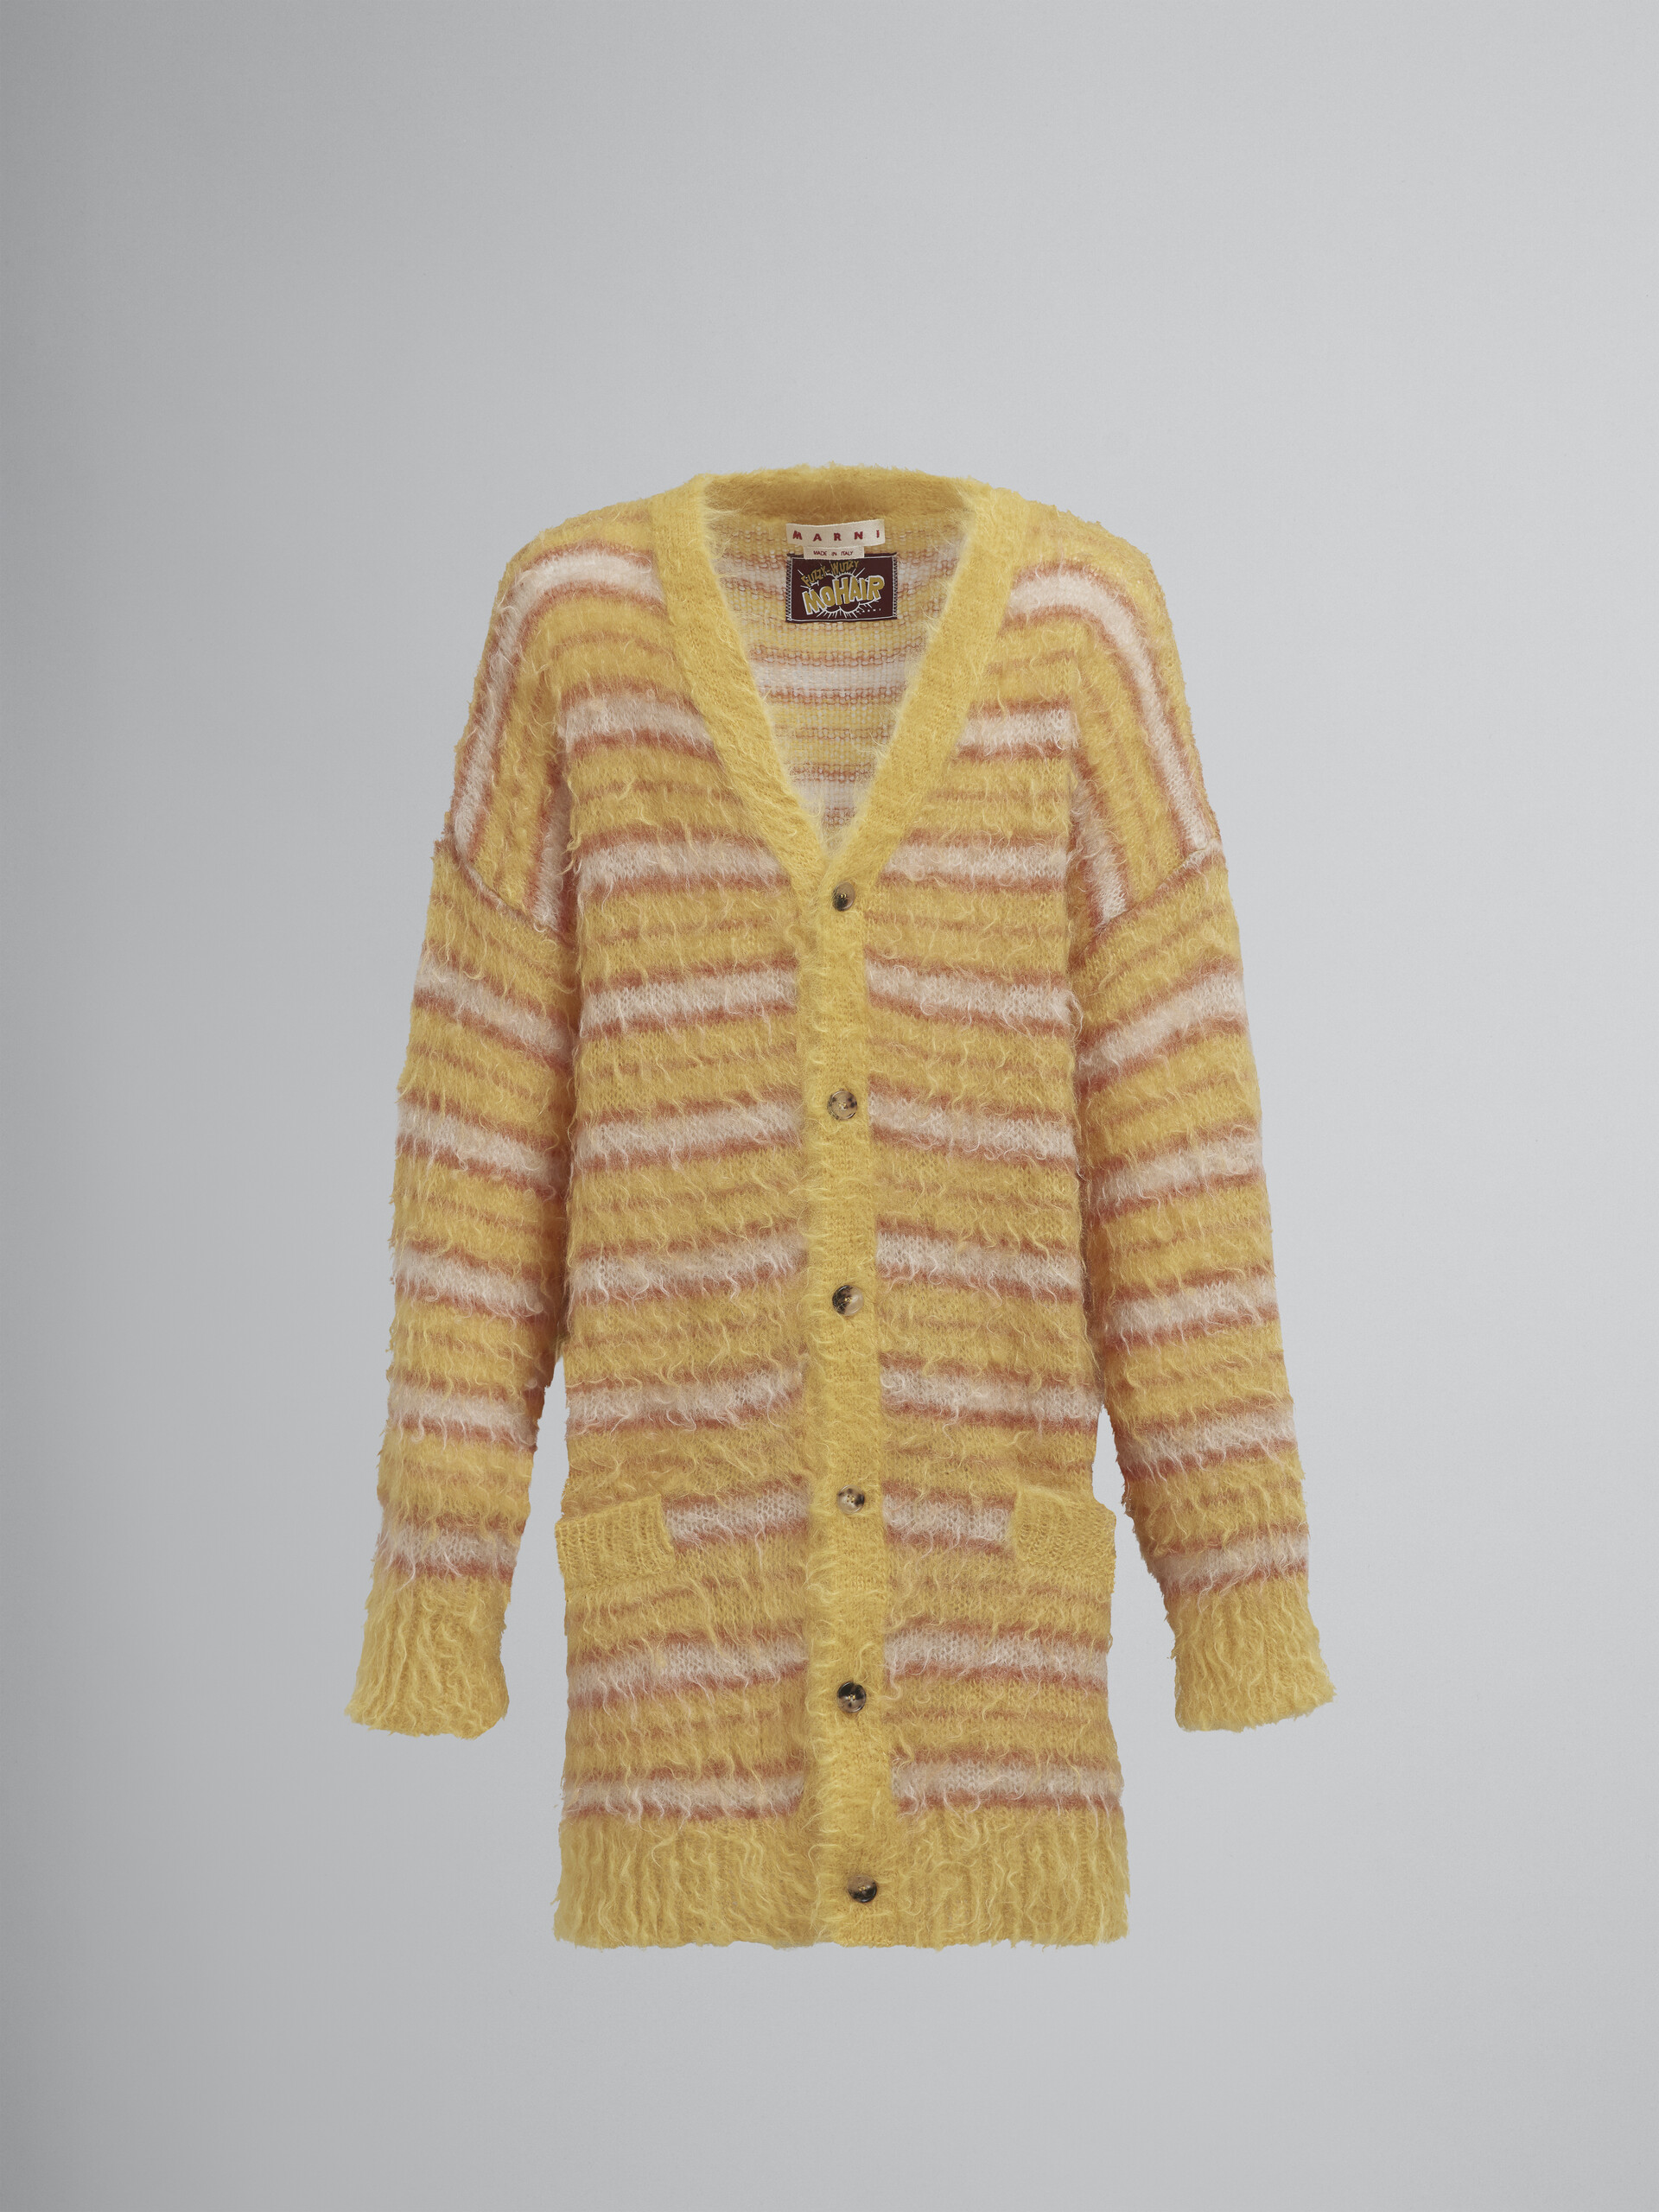 Striped Iconic mohair long cardigan - Pullovers - Image 1